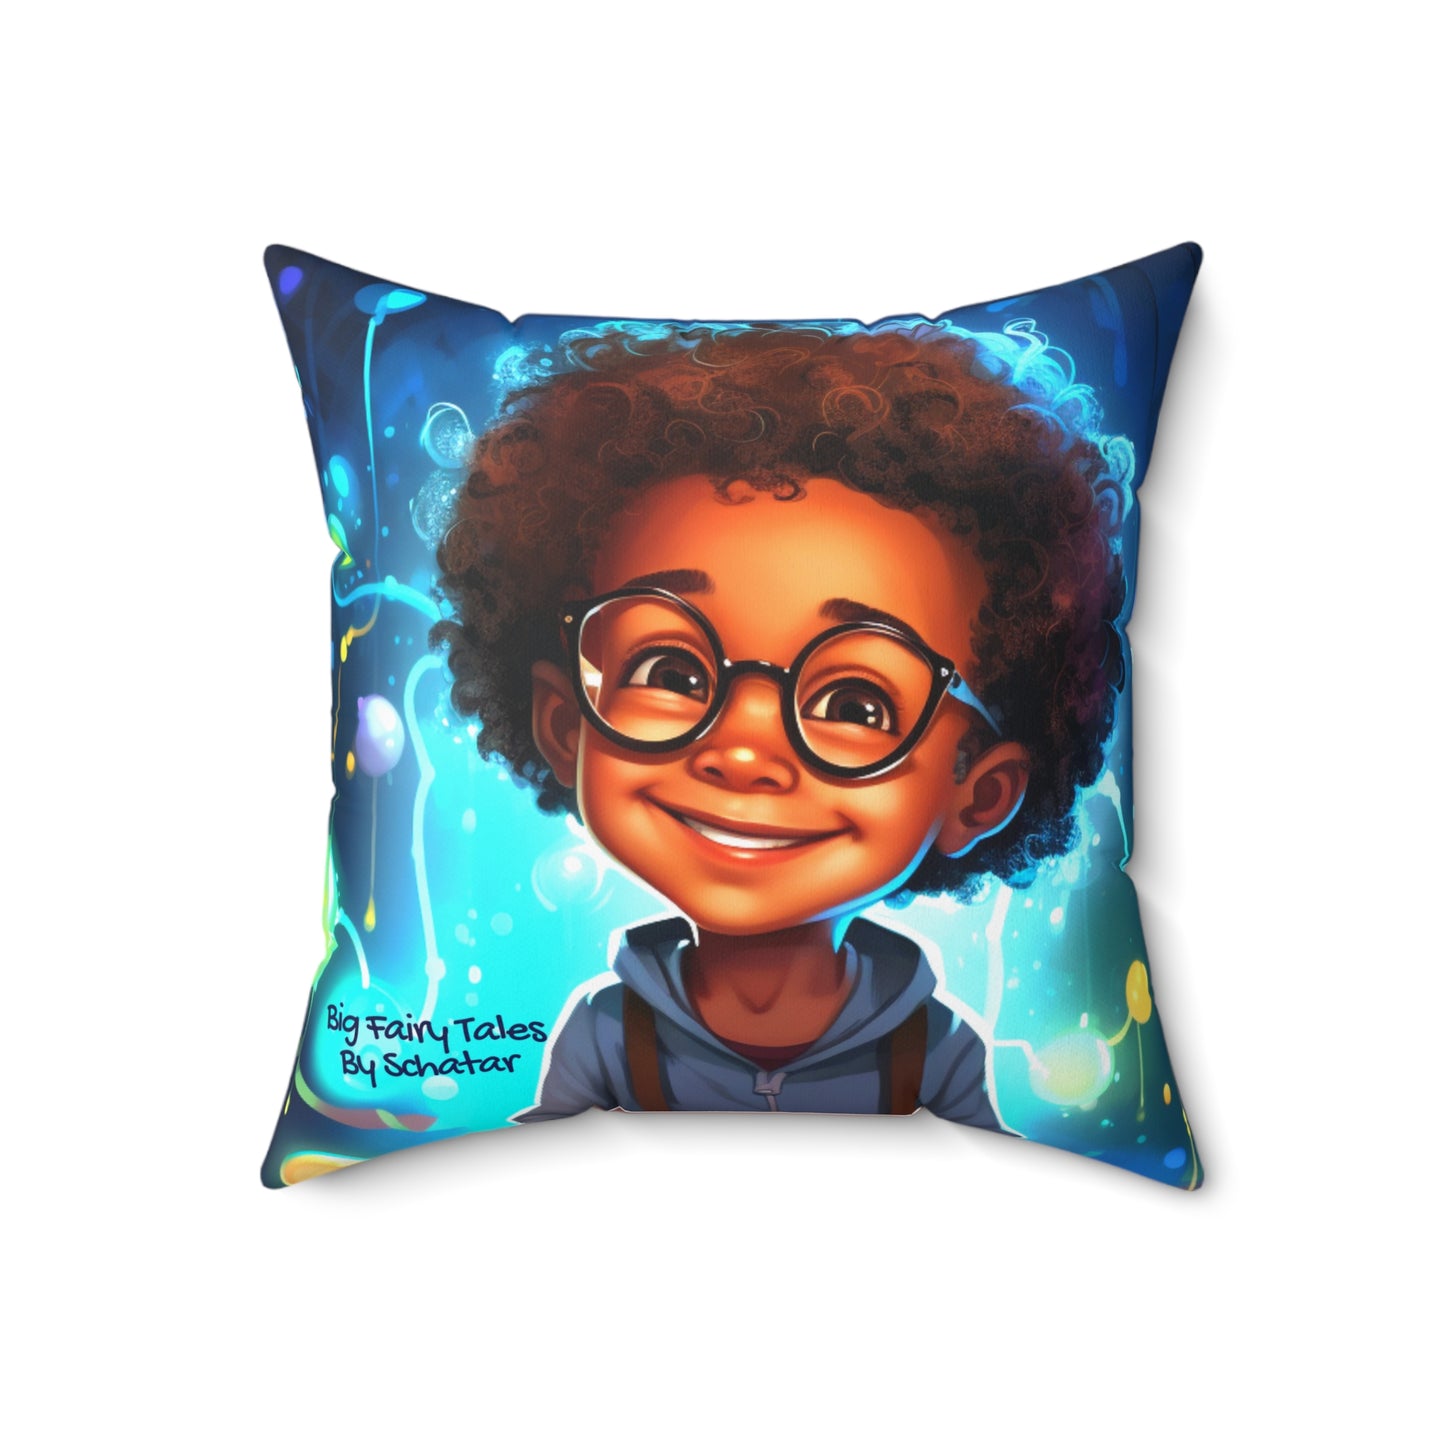 Computer Scientist - Big Little Professionals Plush Pillow 2 From Big Fairy Tales By Schatar